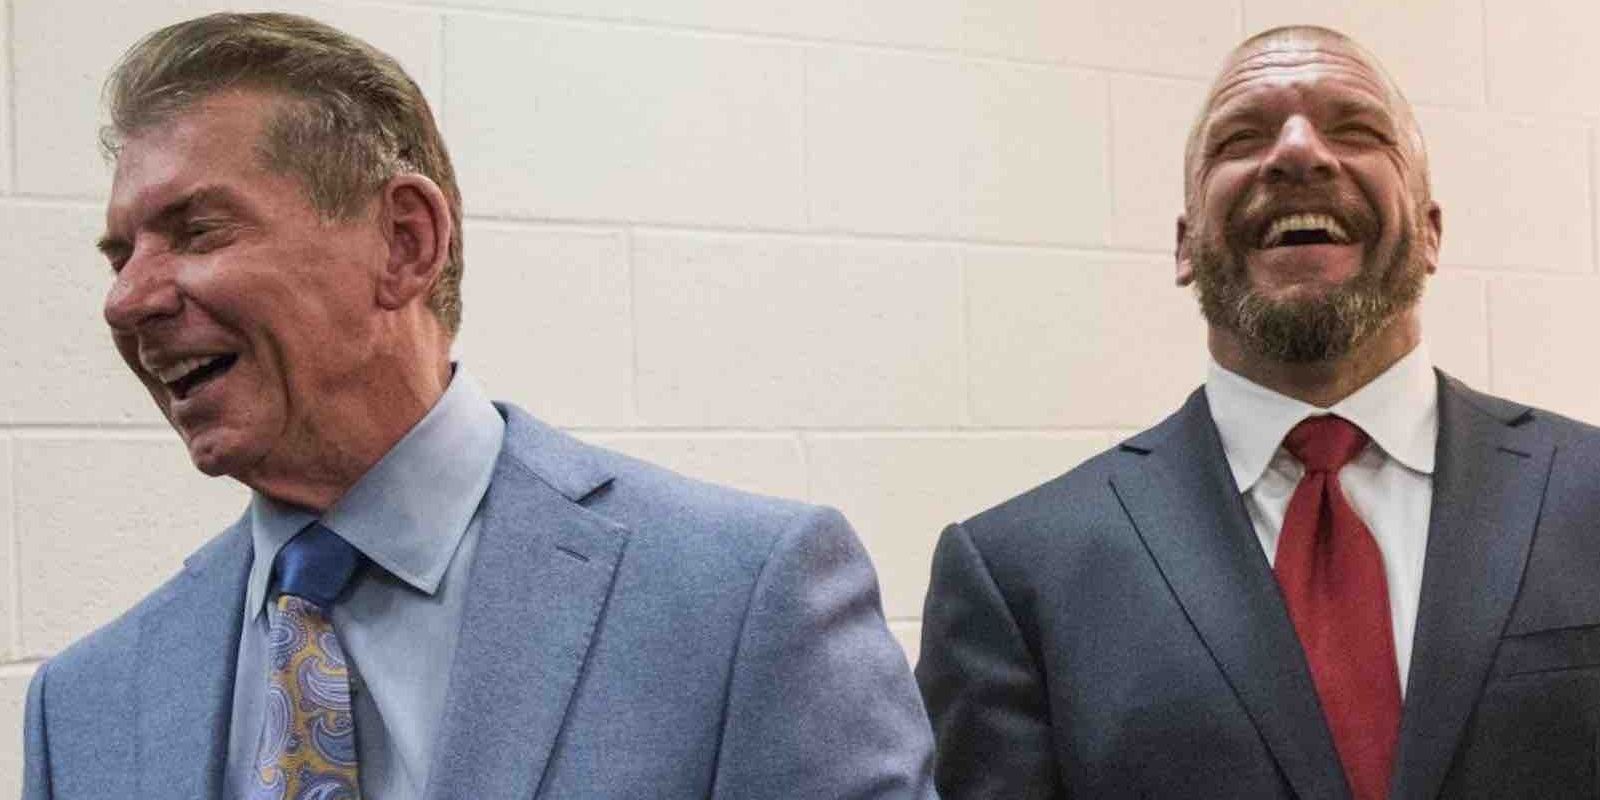 Vince and Triple H laughing Cropped